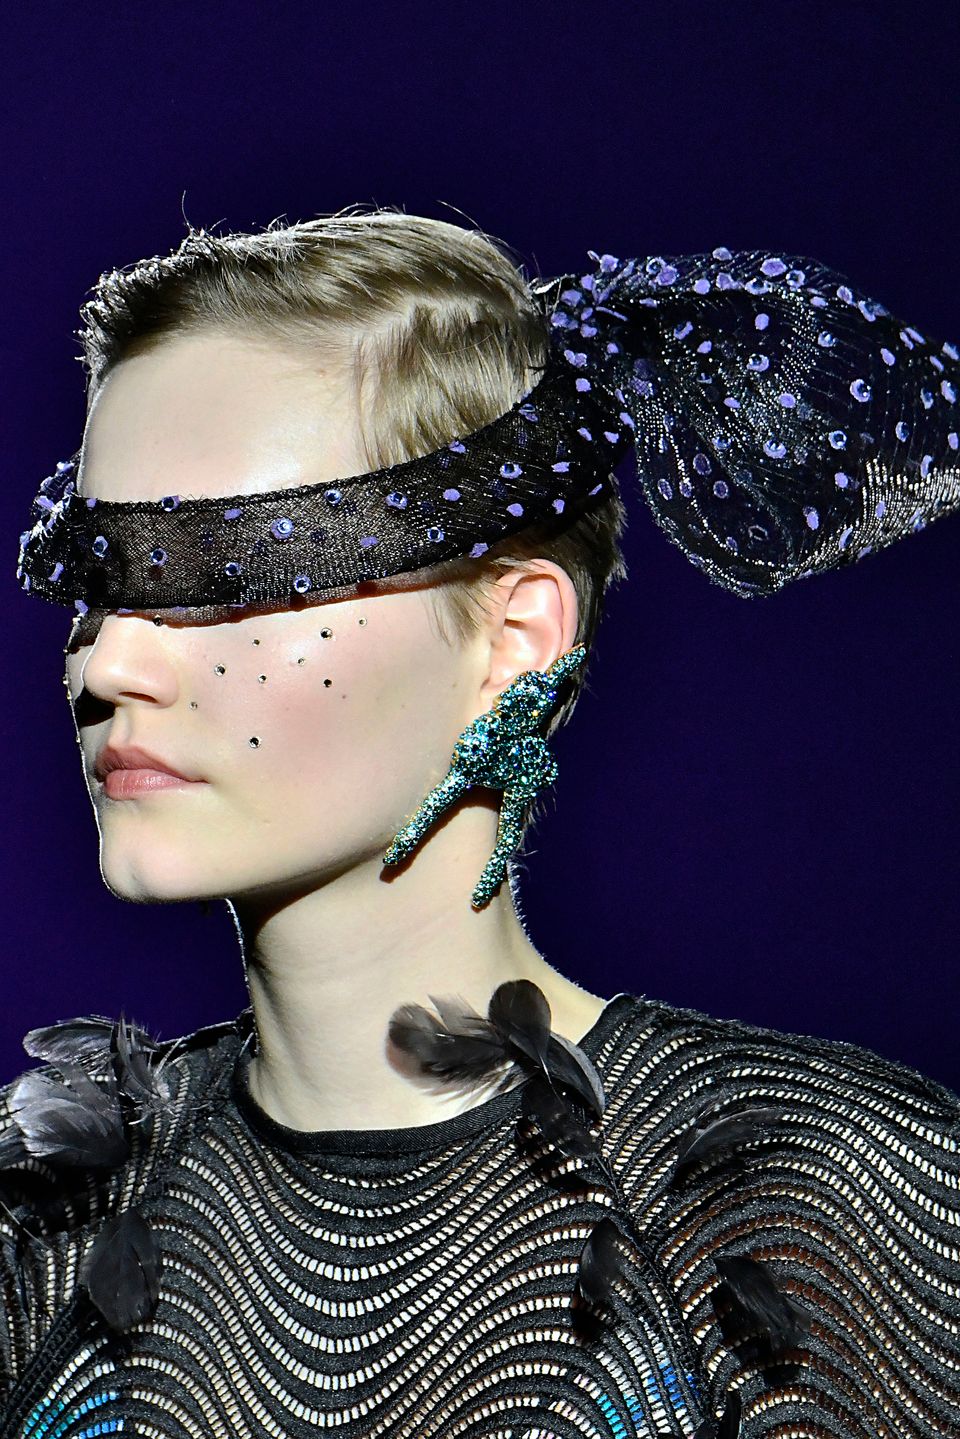 Milan Fashion Week's Most Over-The-Top Runway Looks | HuffPost Life